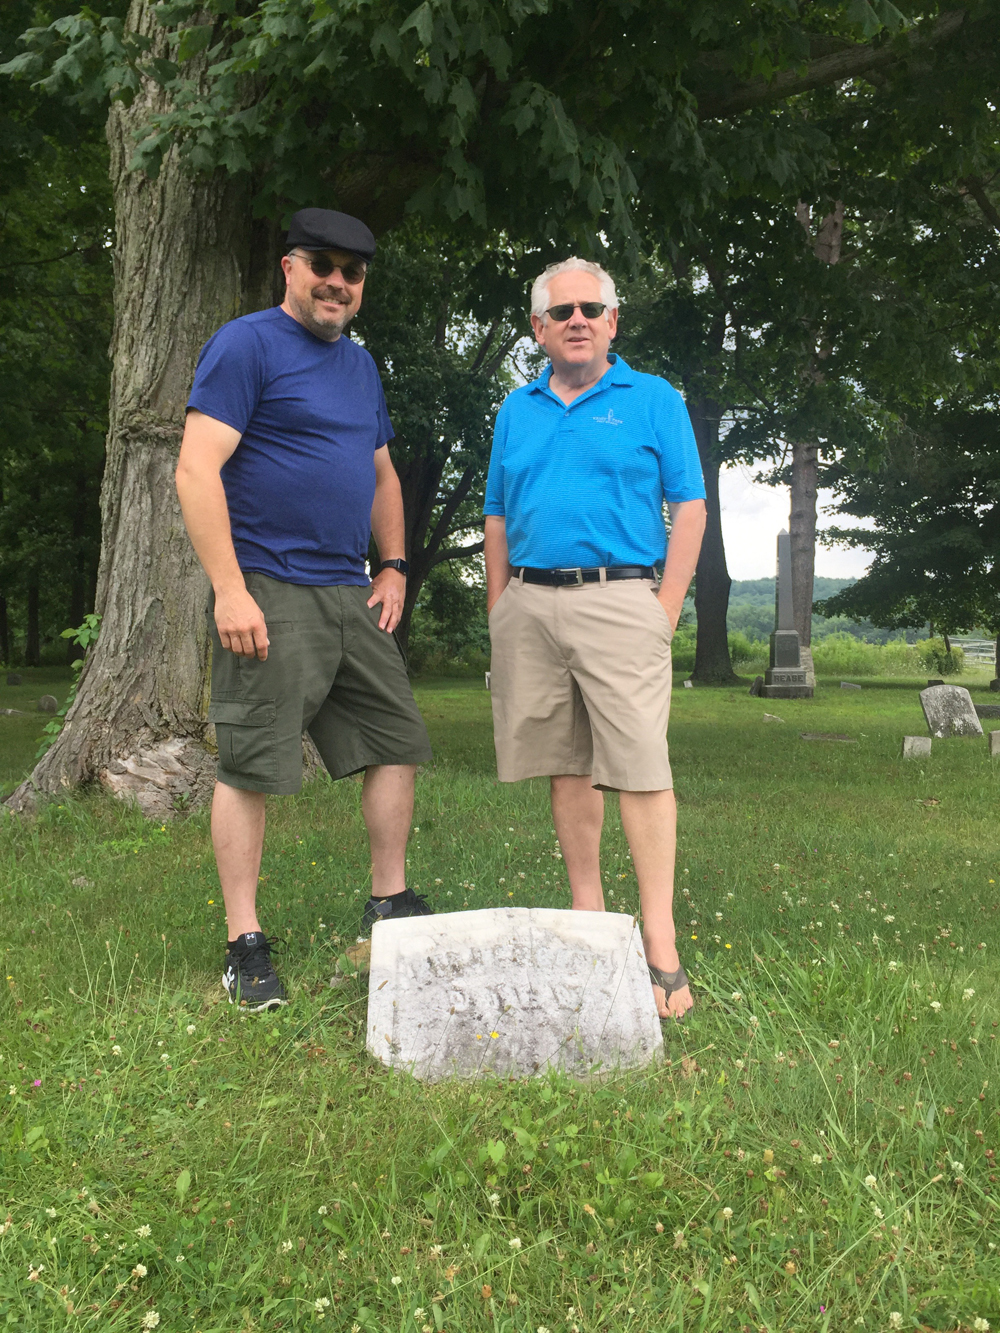 In January/February 2019's Stories to Tell column, Sunny shares the story of cousins Chris and Dave Cooley, who visited the family homestead based on information from an old journal.